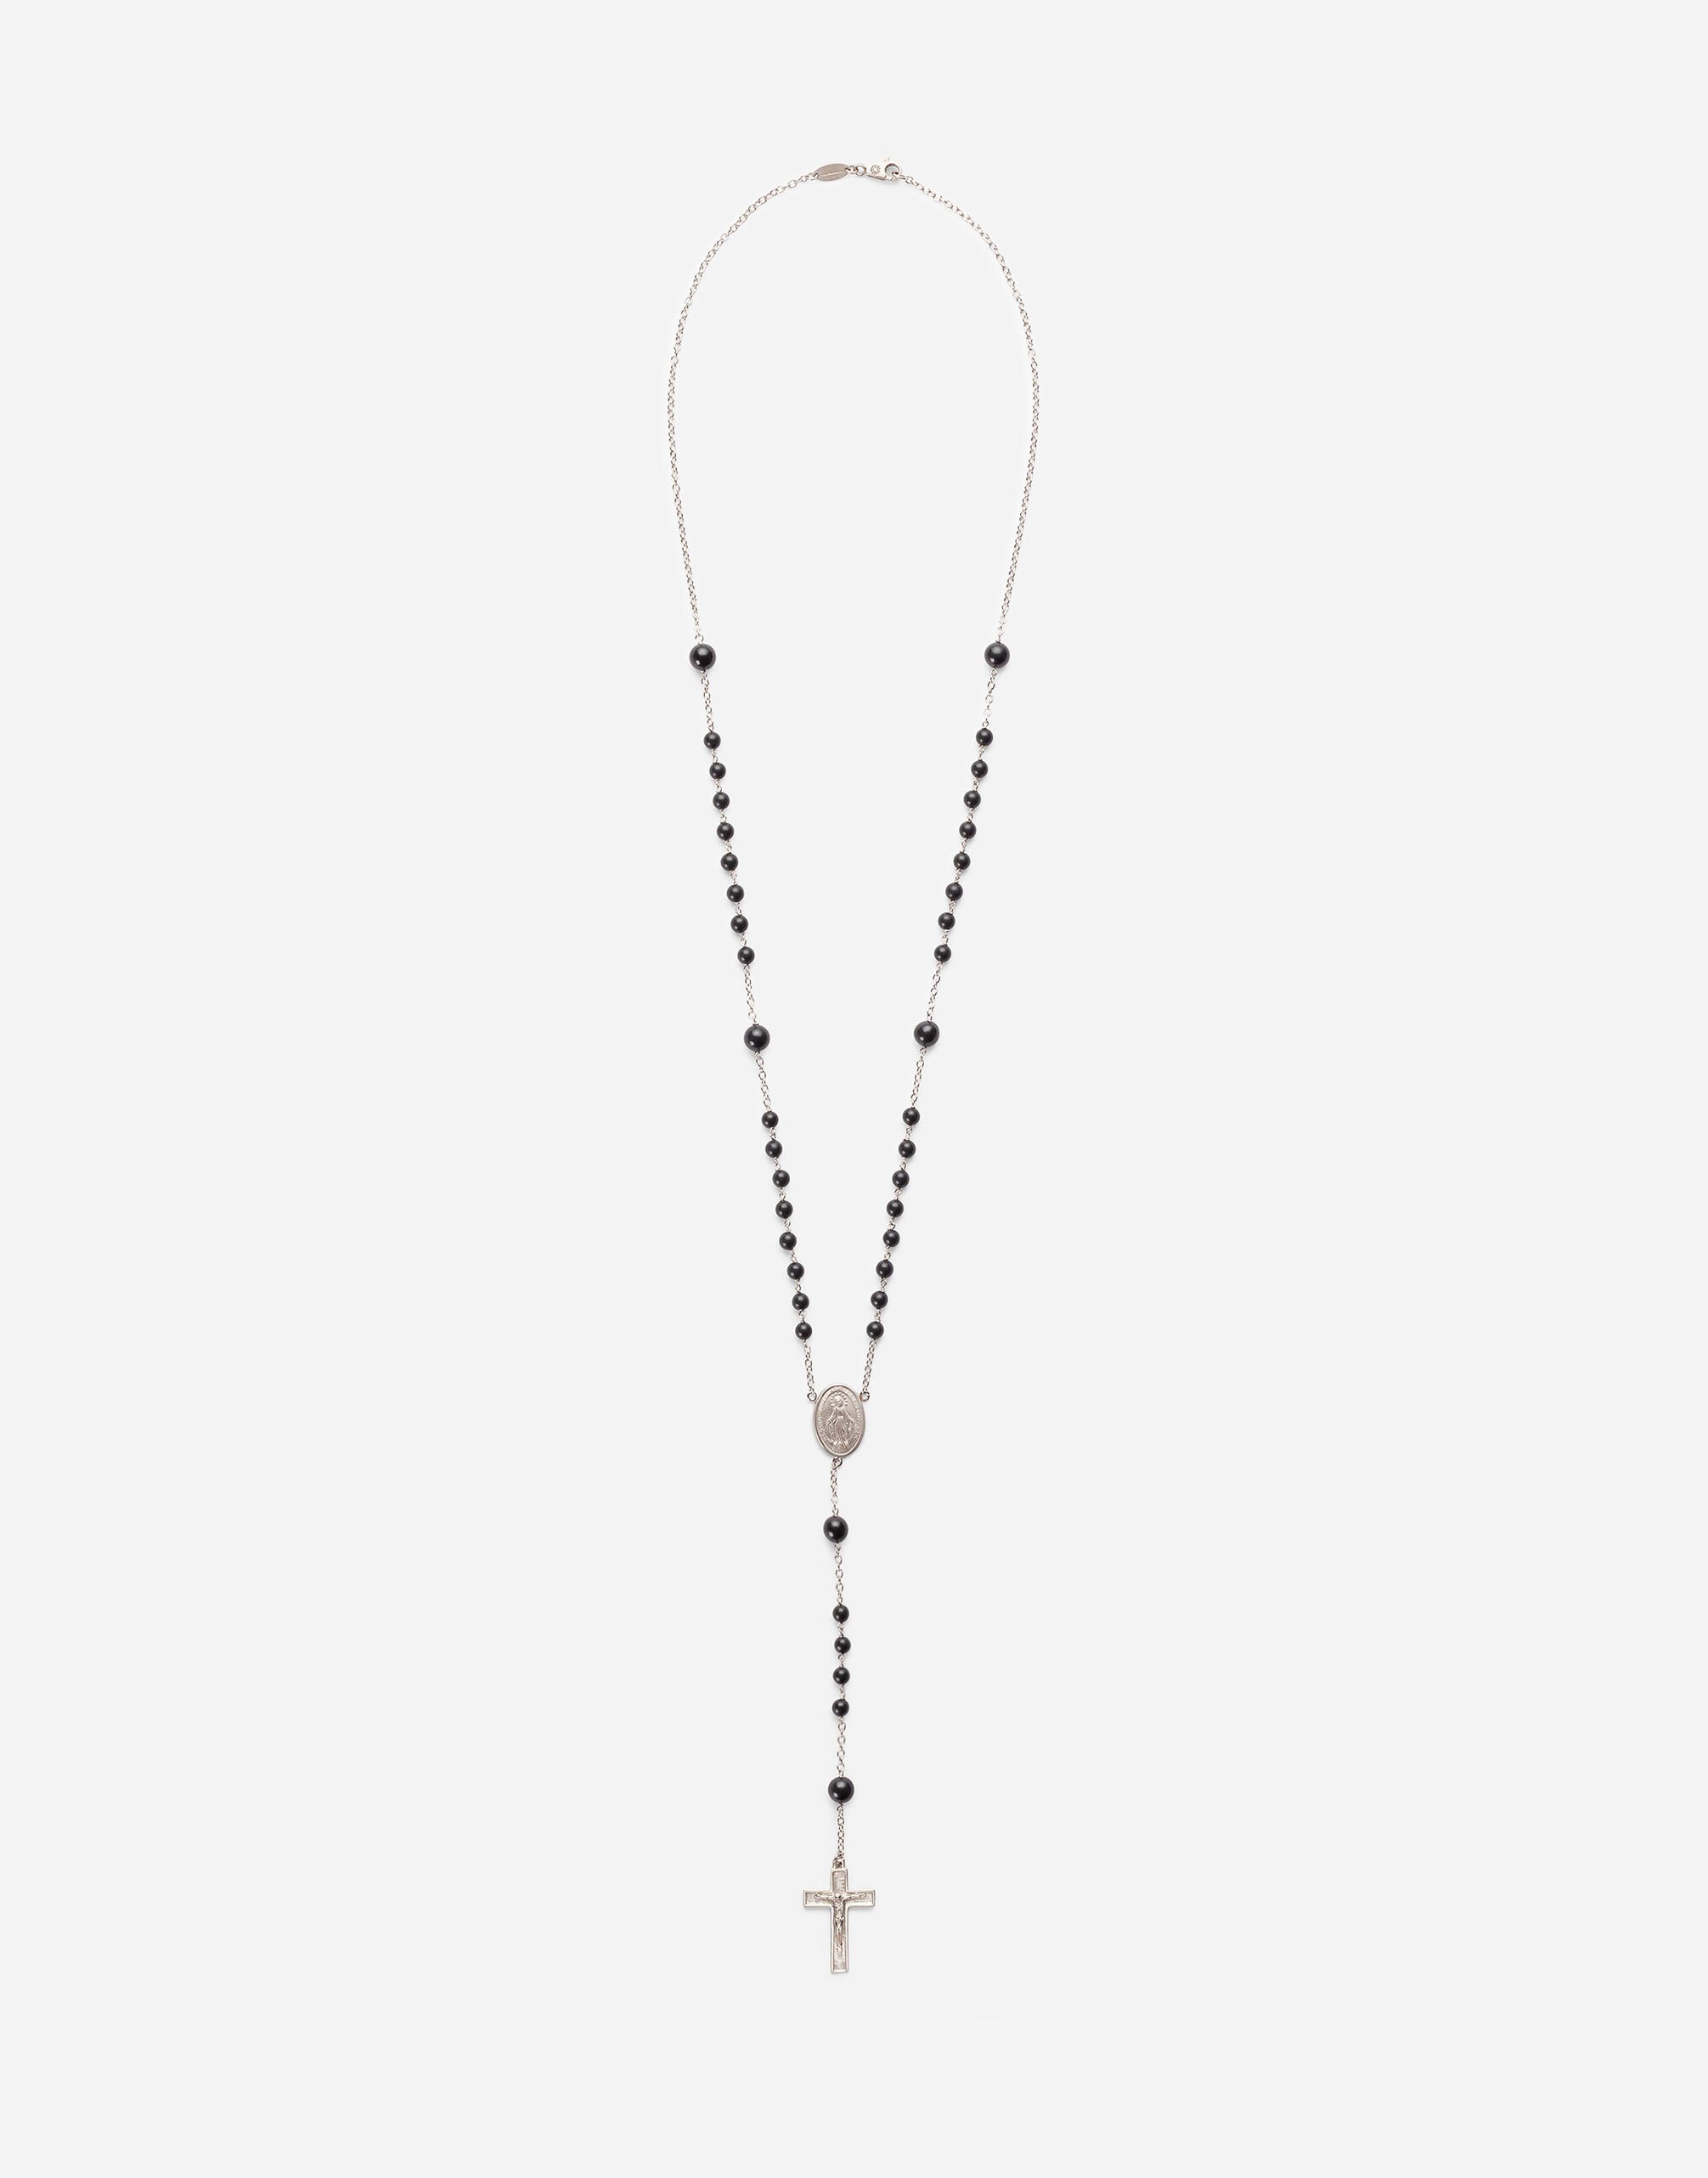 Dolce & Gabbana White gold Devotion rosary necklace with black jade spheres Gold WFHK2GWSAPB